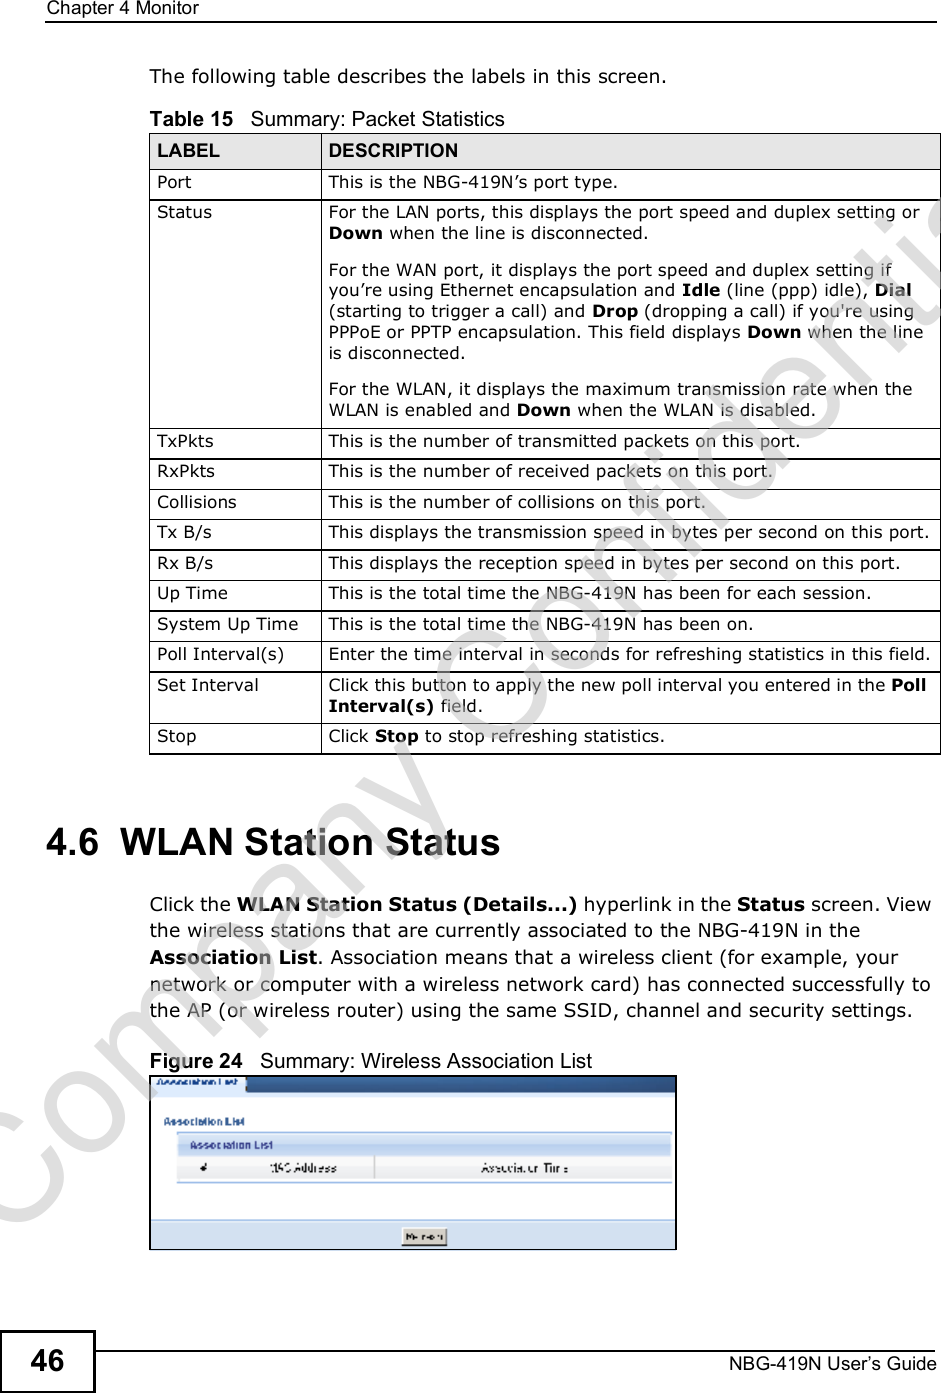 Chapter 4MonitorNBG-419N User s Guide46The following table describes the labels in this screen.4.6  WLAN Station Status     Click the WLAN Station Status (Details...) hyperlink in the Status screen. View the wireless stations that are currently associated to the NBG-419N in the Association List. Association means that a wireless client (for example, your network or computer with a wireless network card) has connected successfully to the AP (or wireless router) using the same SSID, channel and security settings.Figure 24   Summary: Wireless Association ListTable 15   Summary: Packet StatisticsLABEL DESCRIPTIONPort This is the NBG-419N!s port type.Status  For the LAN ports, this displays the port speed and duplex setting or Down when the line is disconnected.For the WAN port, it displays the port speed and duplex setting if you!re using Ethernet encapsulation and Idle (line (ppp) idle), Dial (starting to trigger a call) and Drop (dropping a call) if you&apos;re using PPPoE or PPTP encapsulation. This field displays Down when the line is disconnected.For the WLAN, it displays the maximum transmission rate when the WLAN is enabled and Down when the WLAN is disabled.TxPkts  This is the number of transmitted packets on this port.RxPkts  This is the number of received packets on this port.Collisions  This is the number of collisions on this port.Tx B/s  This displays the transmission speed in bytes per second on this port.Rx B/s This displays the reception speed in bytes per second on this port.Up Time This is the total time the NBG-419N has been for each session.System Up Time This is the total time the NBG-419N has been on.Poll Interval(s) Enter the time interval in seconds for refreshing statistics in this field.Set Interval Click this button to apply the new poll interval you entered in the Poll Interval(s) field.Stop Click Stop to stop refreshing statistics.Company Confidential